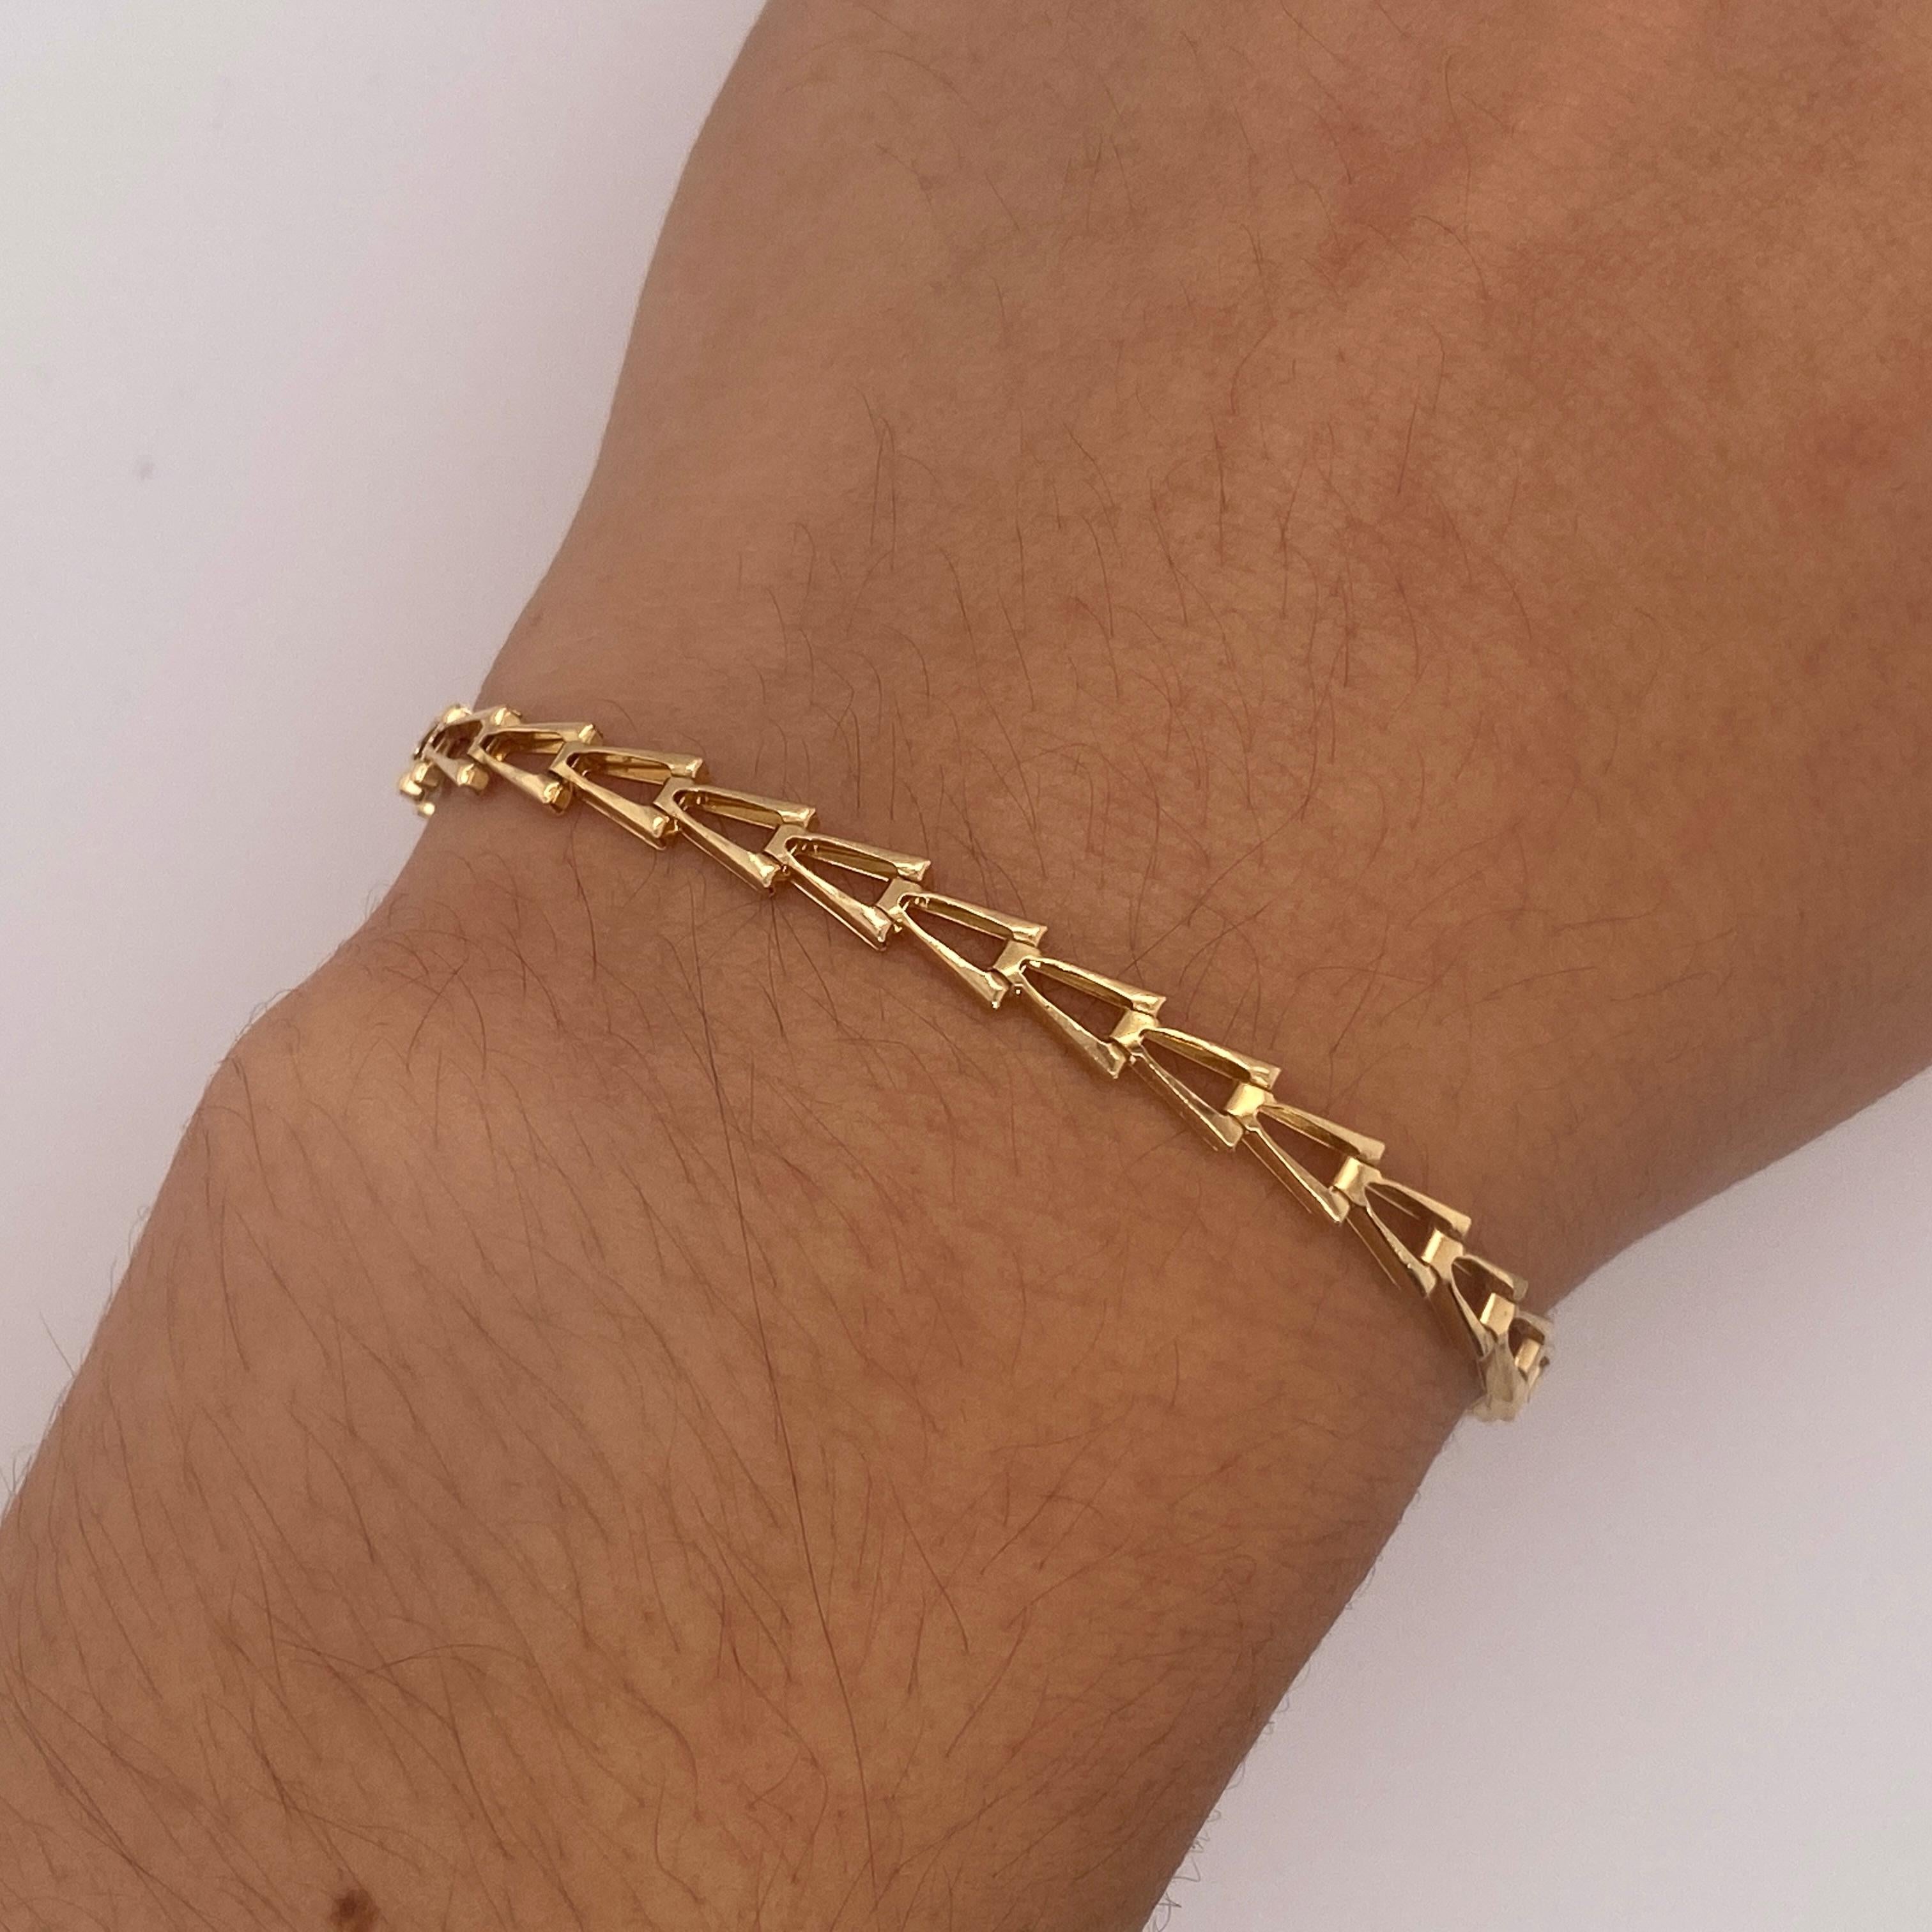 Keep your look clean and simple with this beautiful geometric fancy link bracelet. Or stack it with some other bracelets you love! Each V-link in this bracelet moves fluidly and independently on the tube style hinges at the open top of each 'V'.